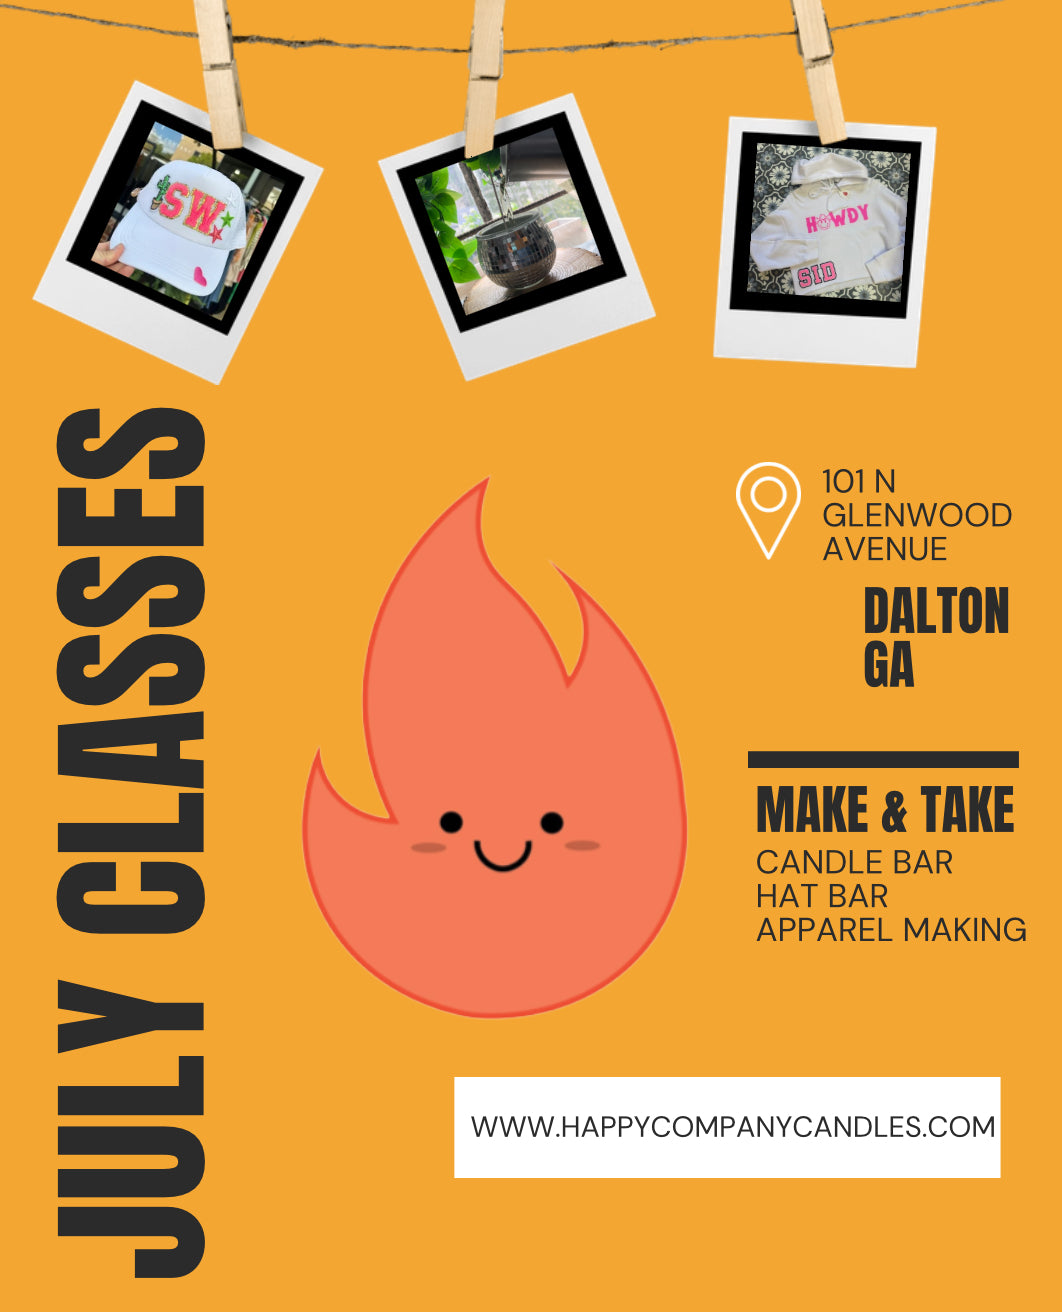 July Makers Space (Candle, Hat or apparel making)